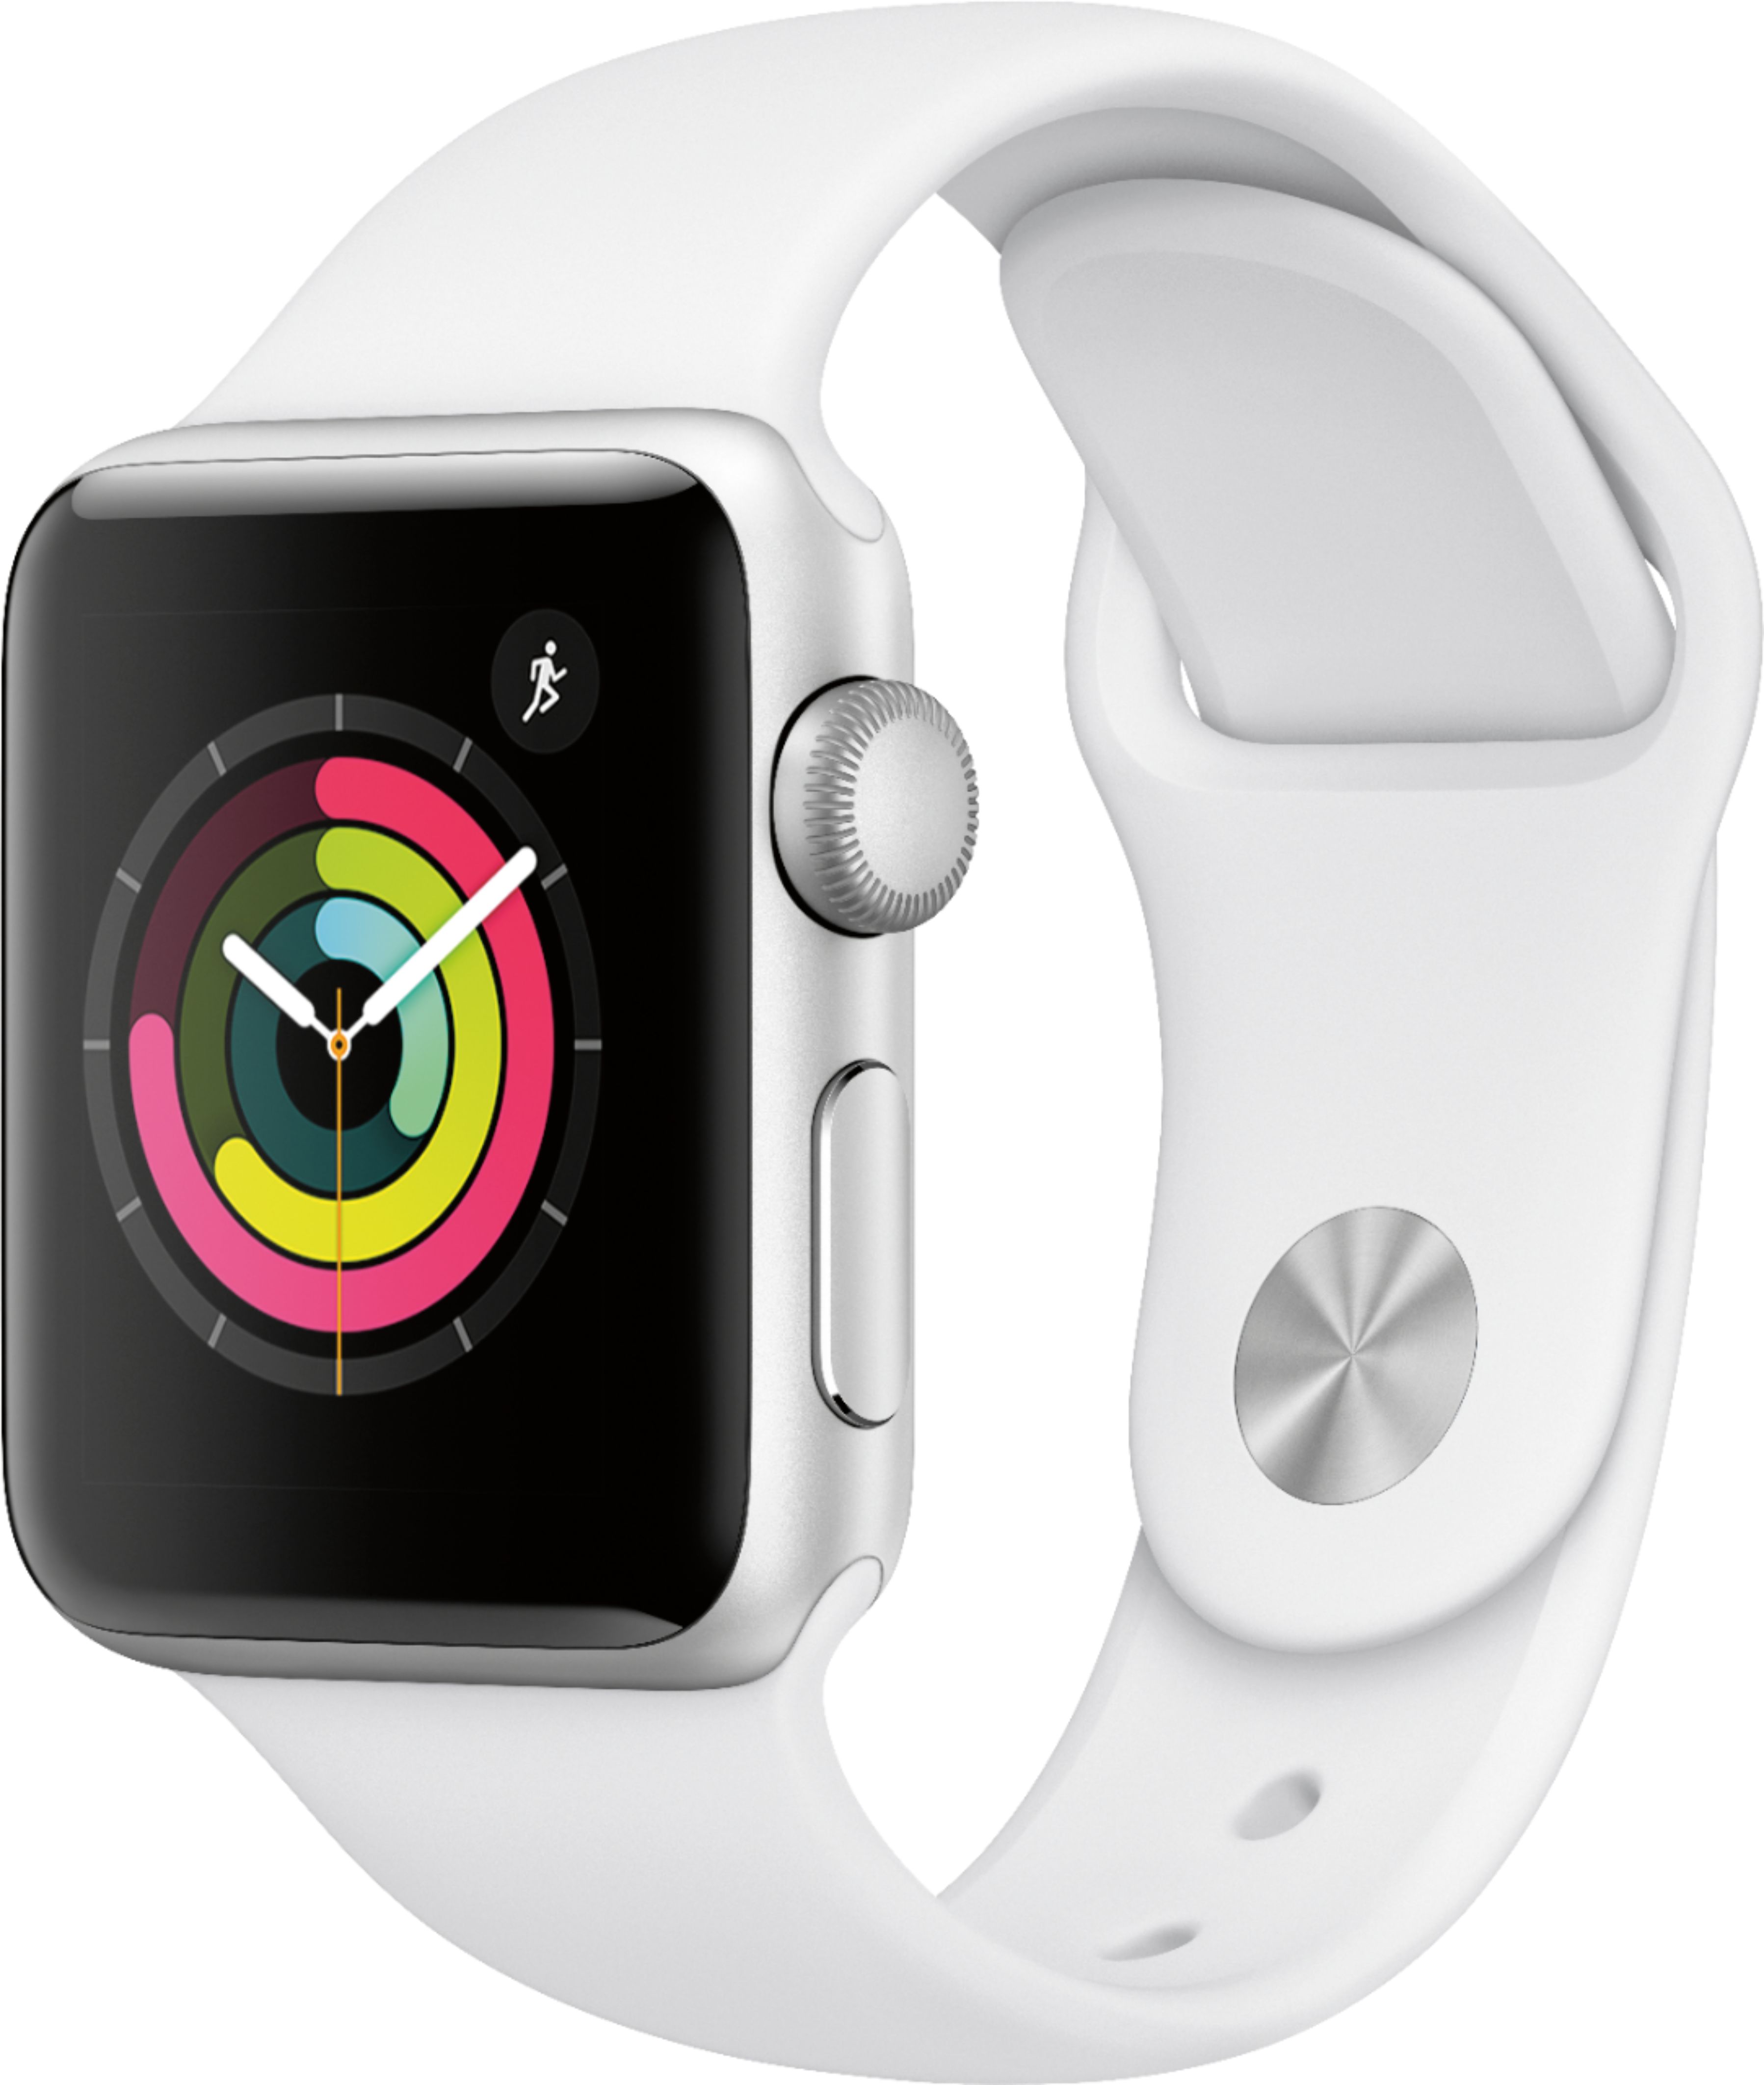 Apple Watch Series 3 (GPS) 38mm Aluminum Case with White Sport Band  Aluminum - Silver Aluminum